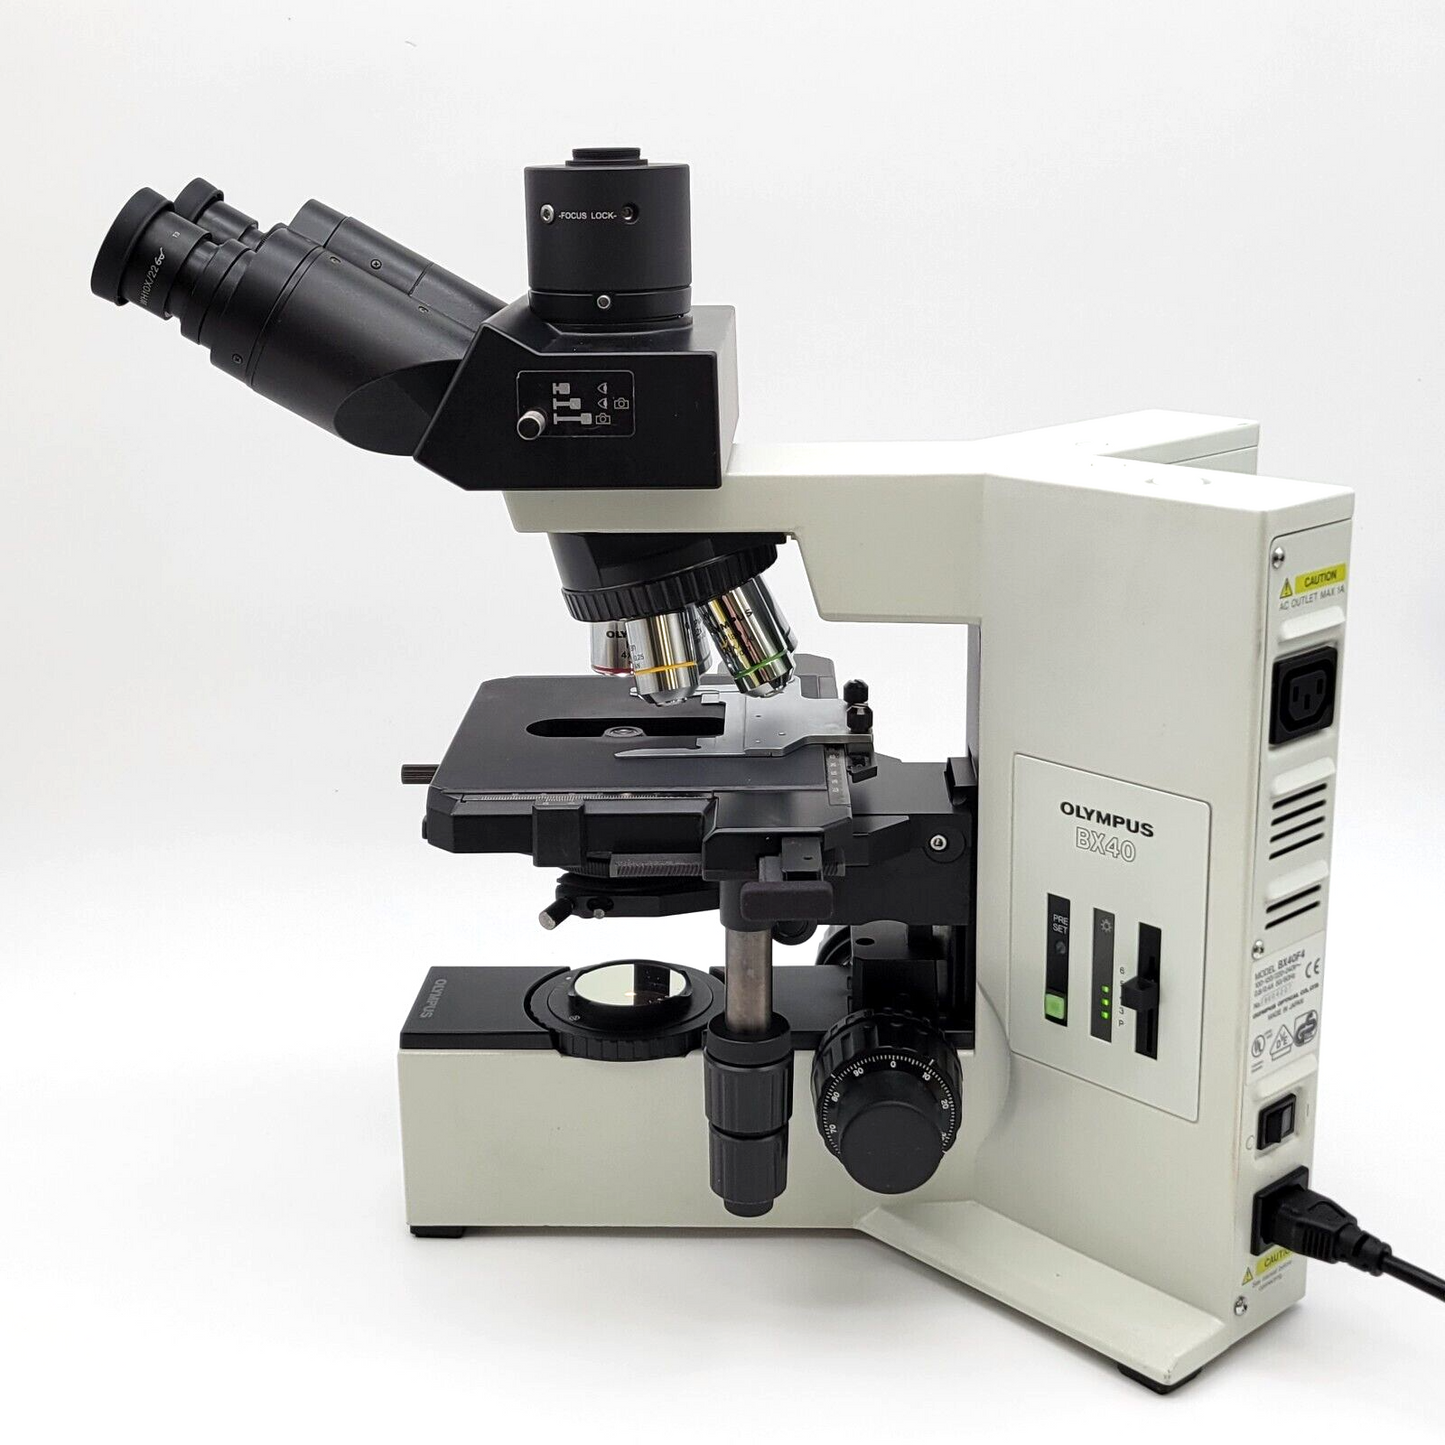 Olympus Microscope BX40 with Trinocular Head and 2X Objective - microscopemarketplace